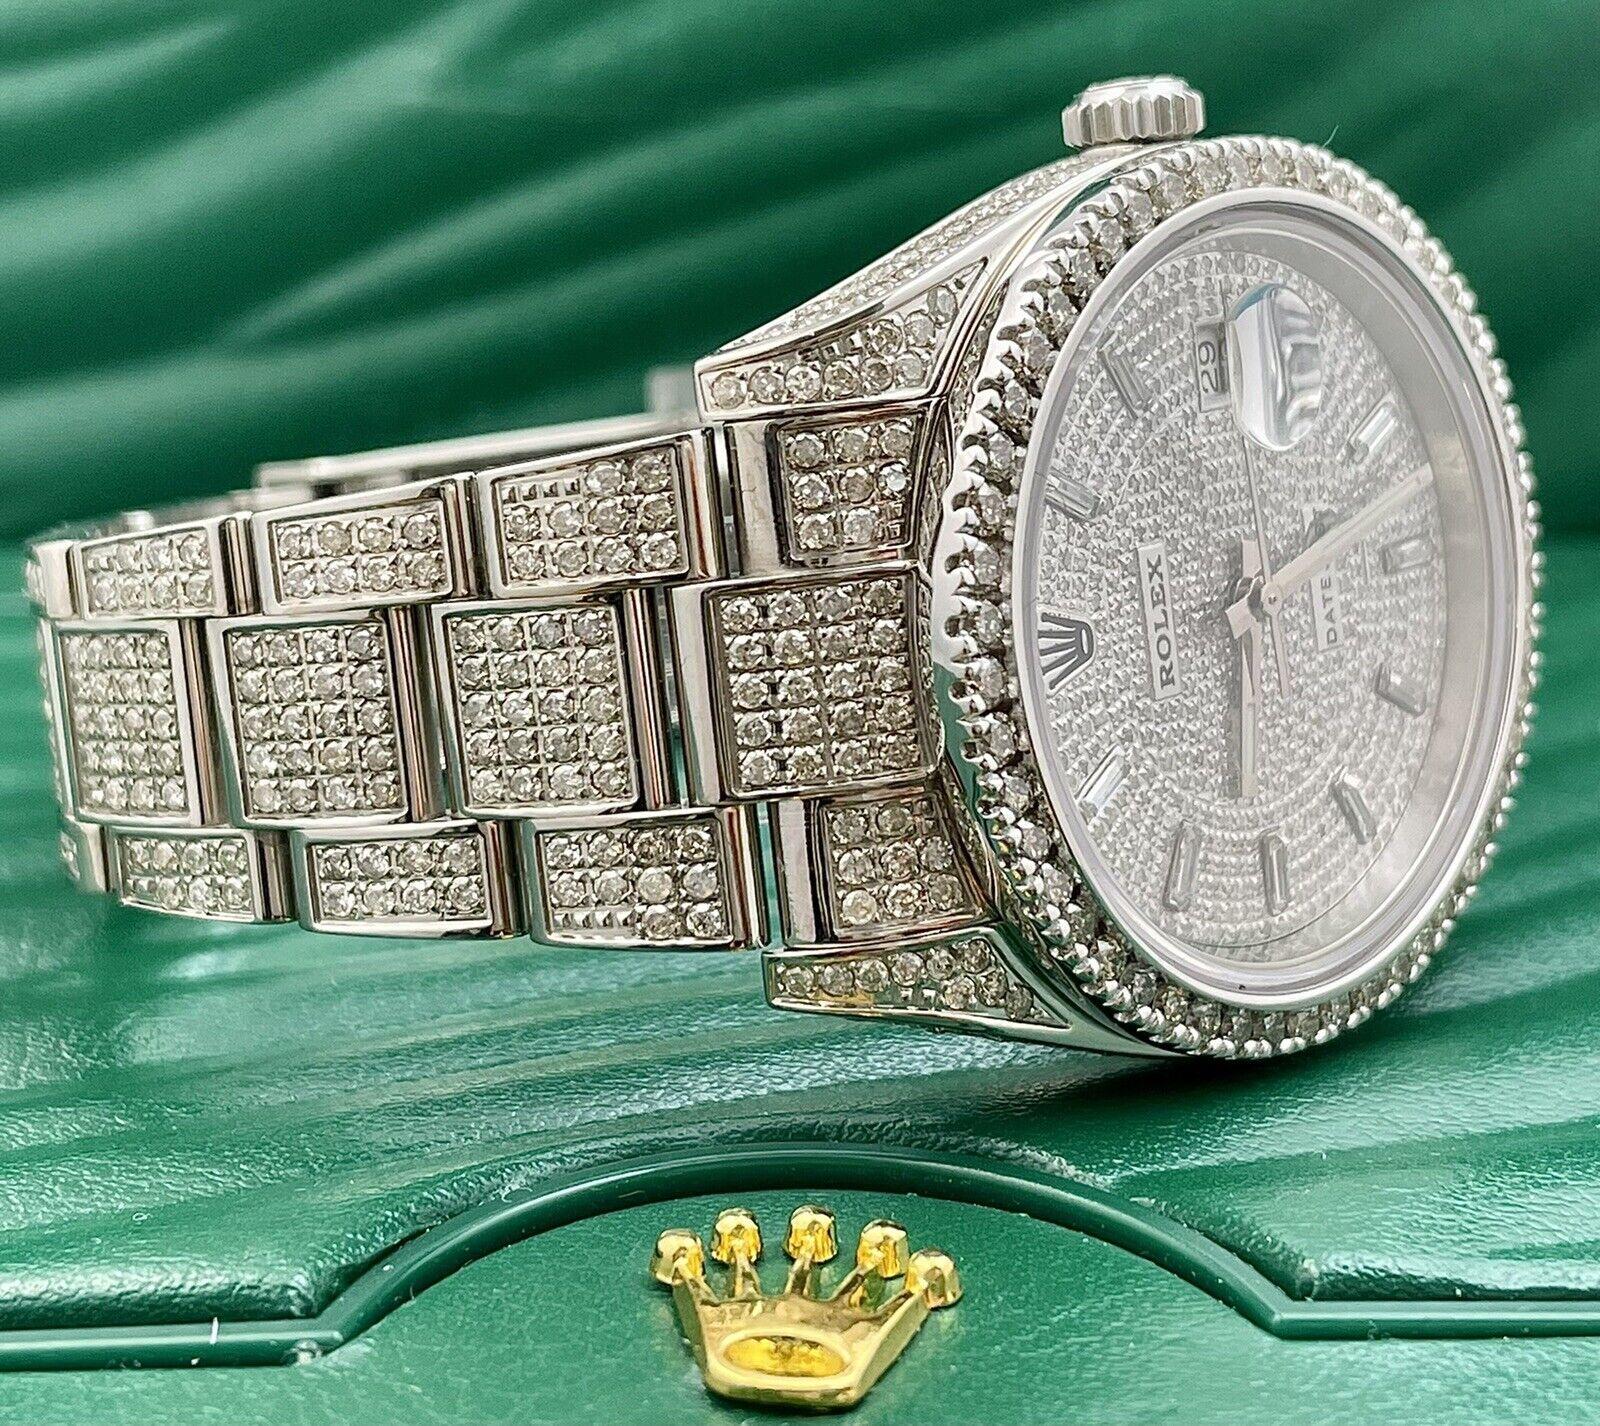 Rolex Datejust 41mm Watch. A Pre-owned watch w/ Gift Box. The Watch Itself is 100% Authentic and Comes with Authenticity Card. Watch Reference is 116300 and is in Excellent Condition (See Pictures). The material is Stainless Steel. 13ct Diamonds